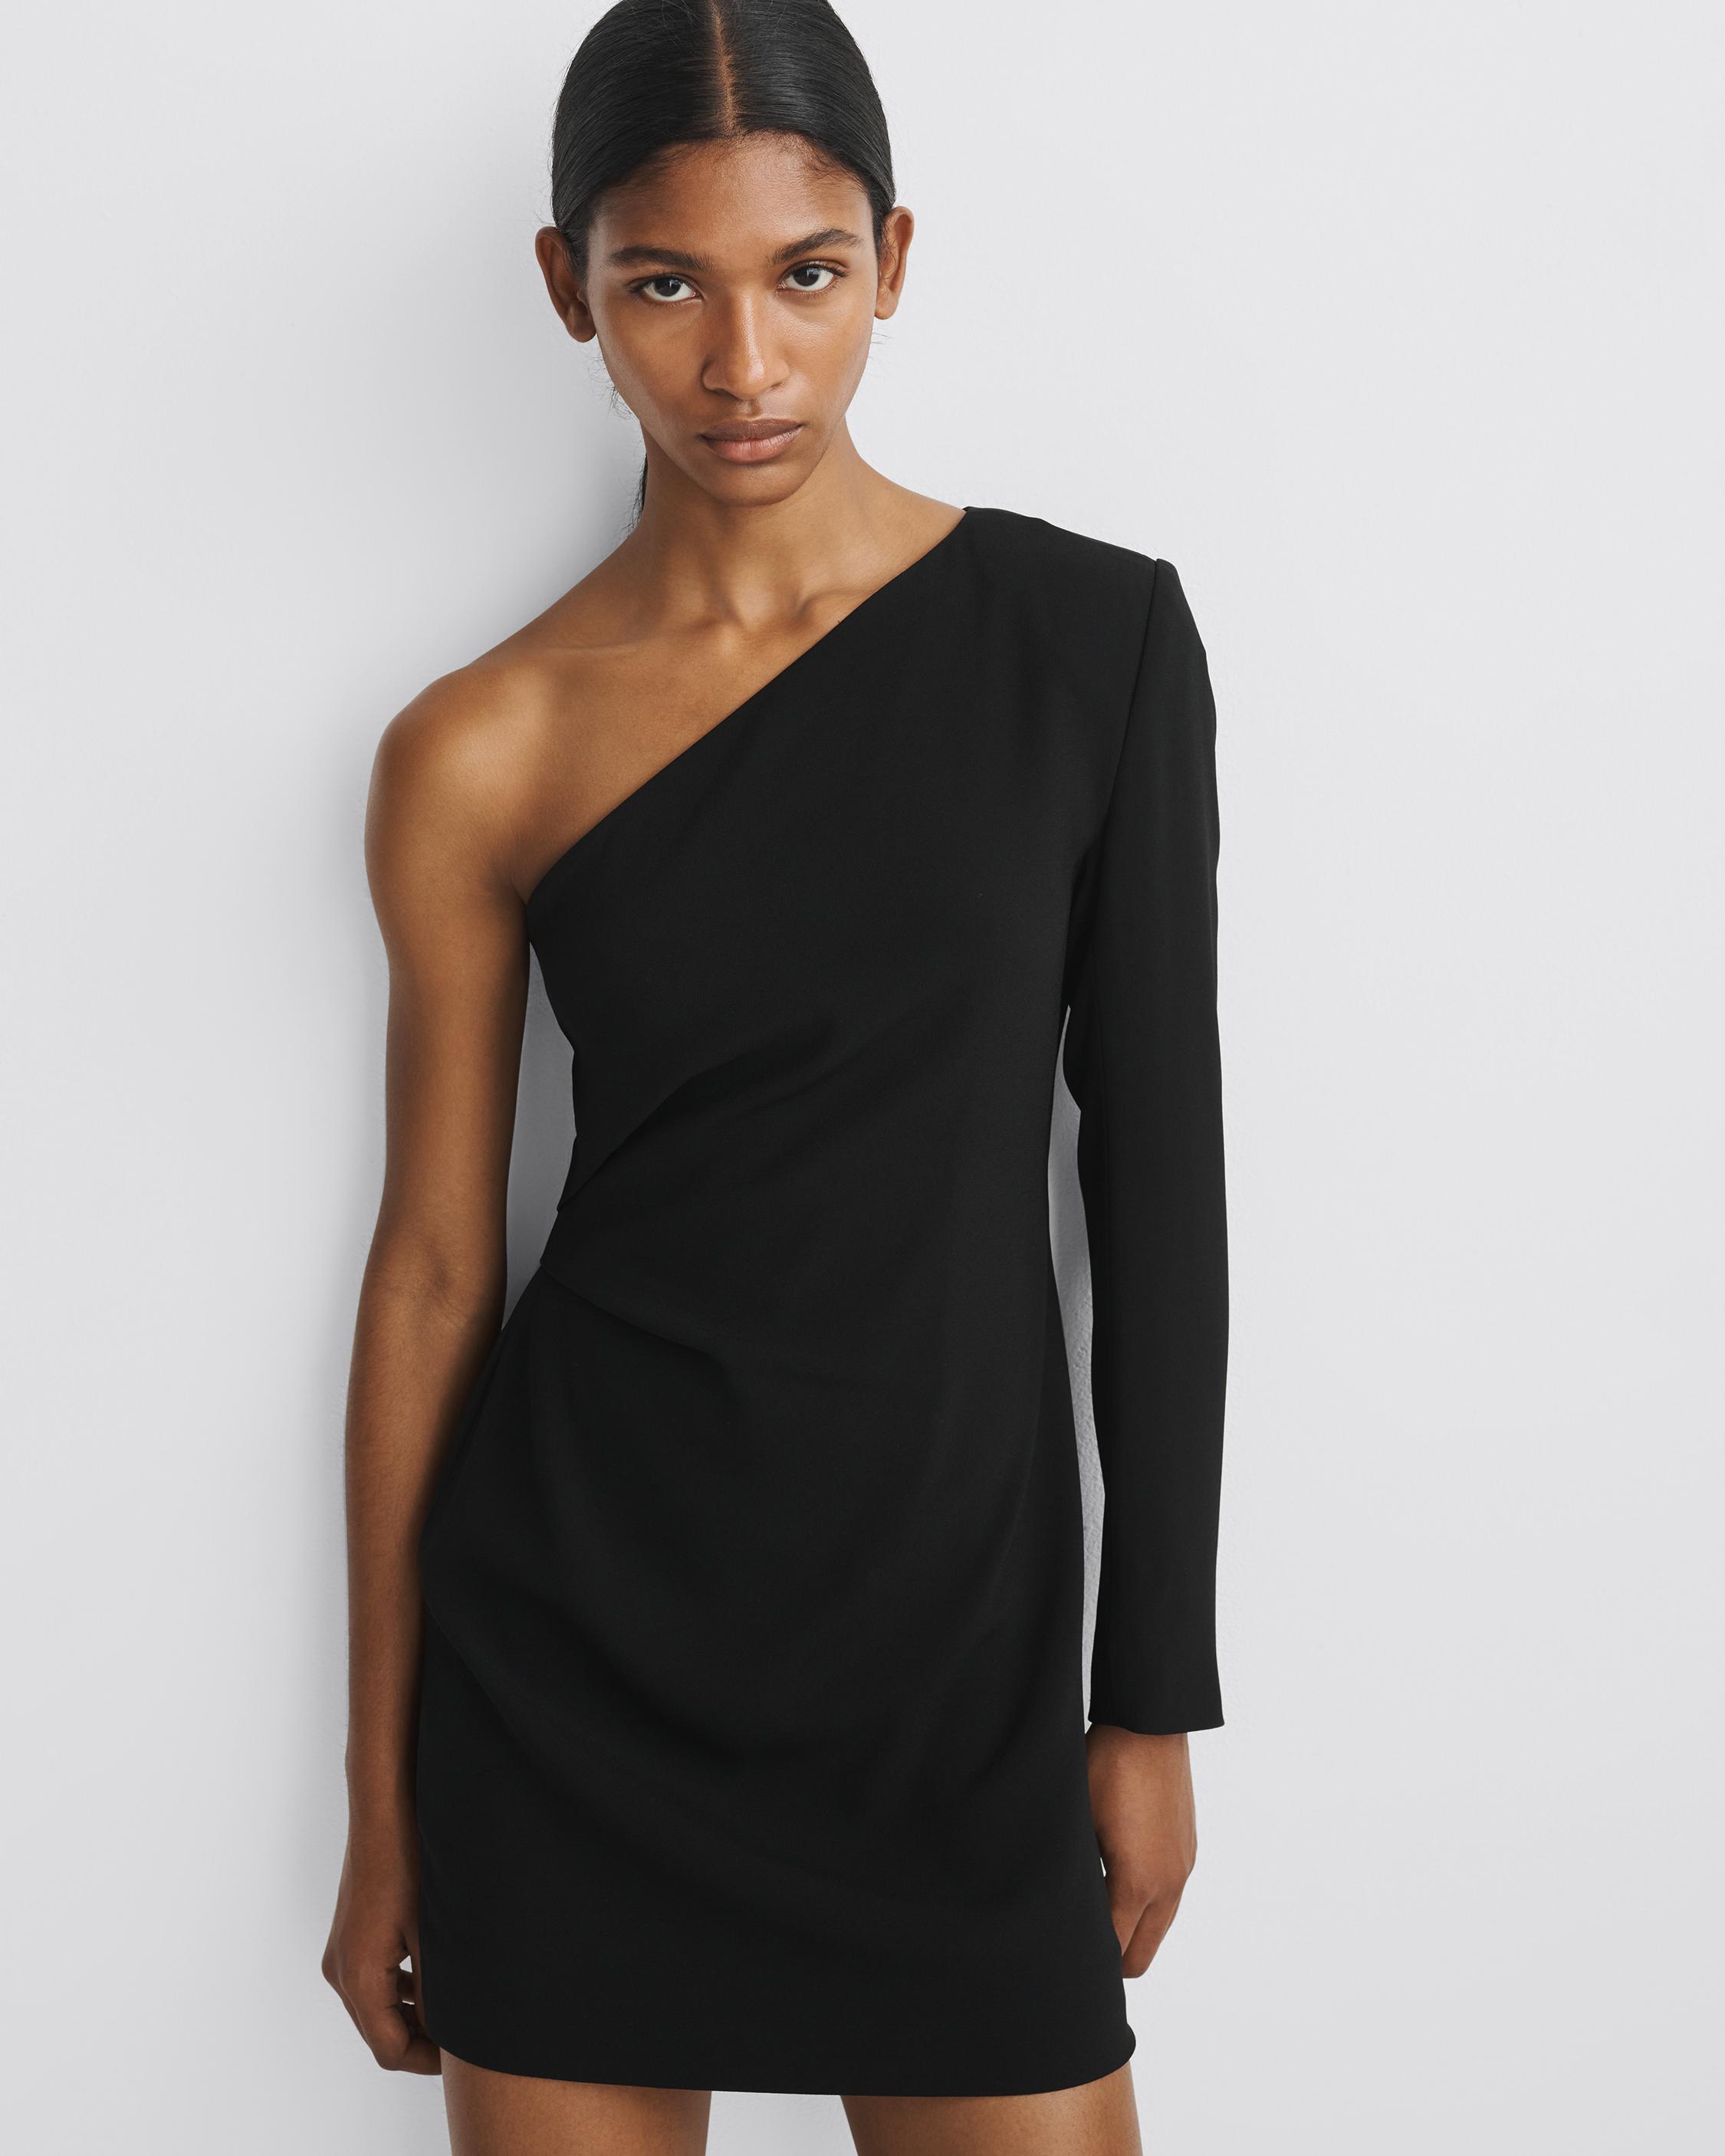 The outsize influence of the little black dress